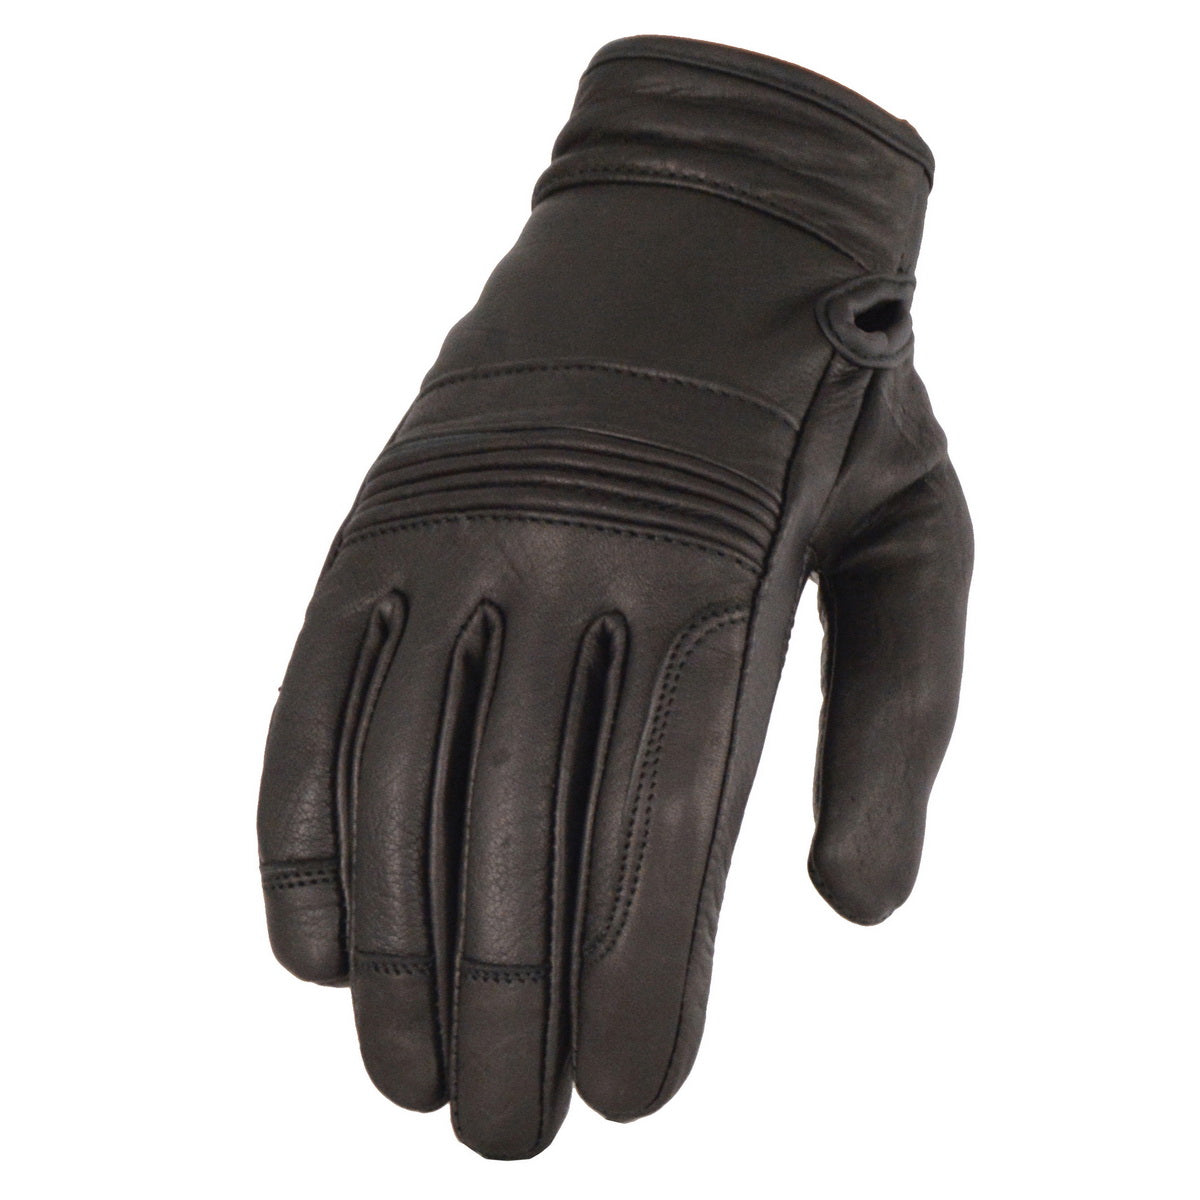 Milwaukee Leather MG7735 Women's Black Leather Gel Palm Motorcycle Hand Gloves W/ Flex Knuckles